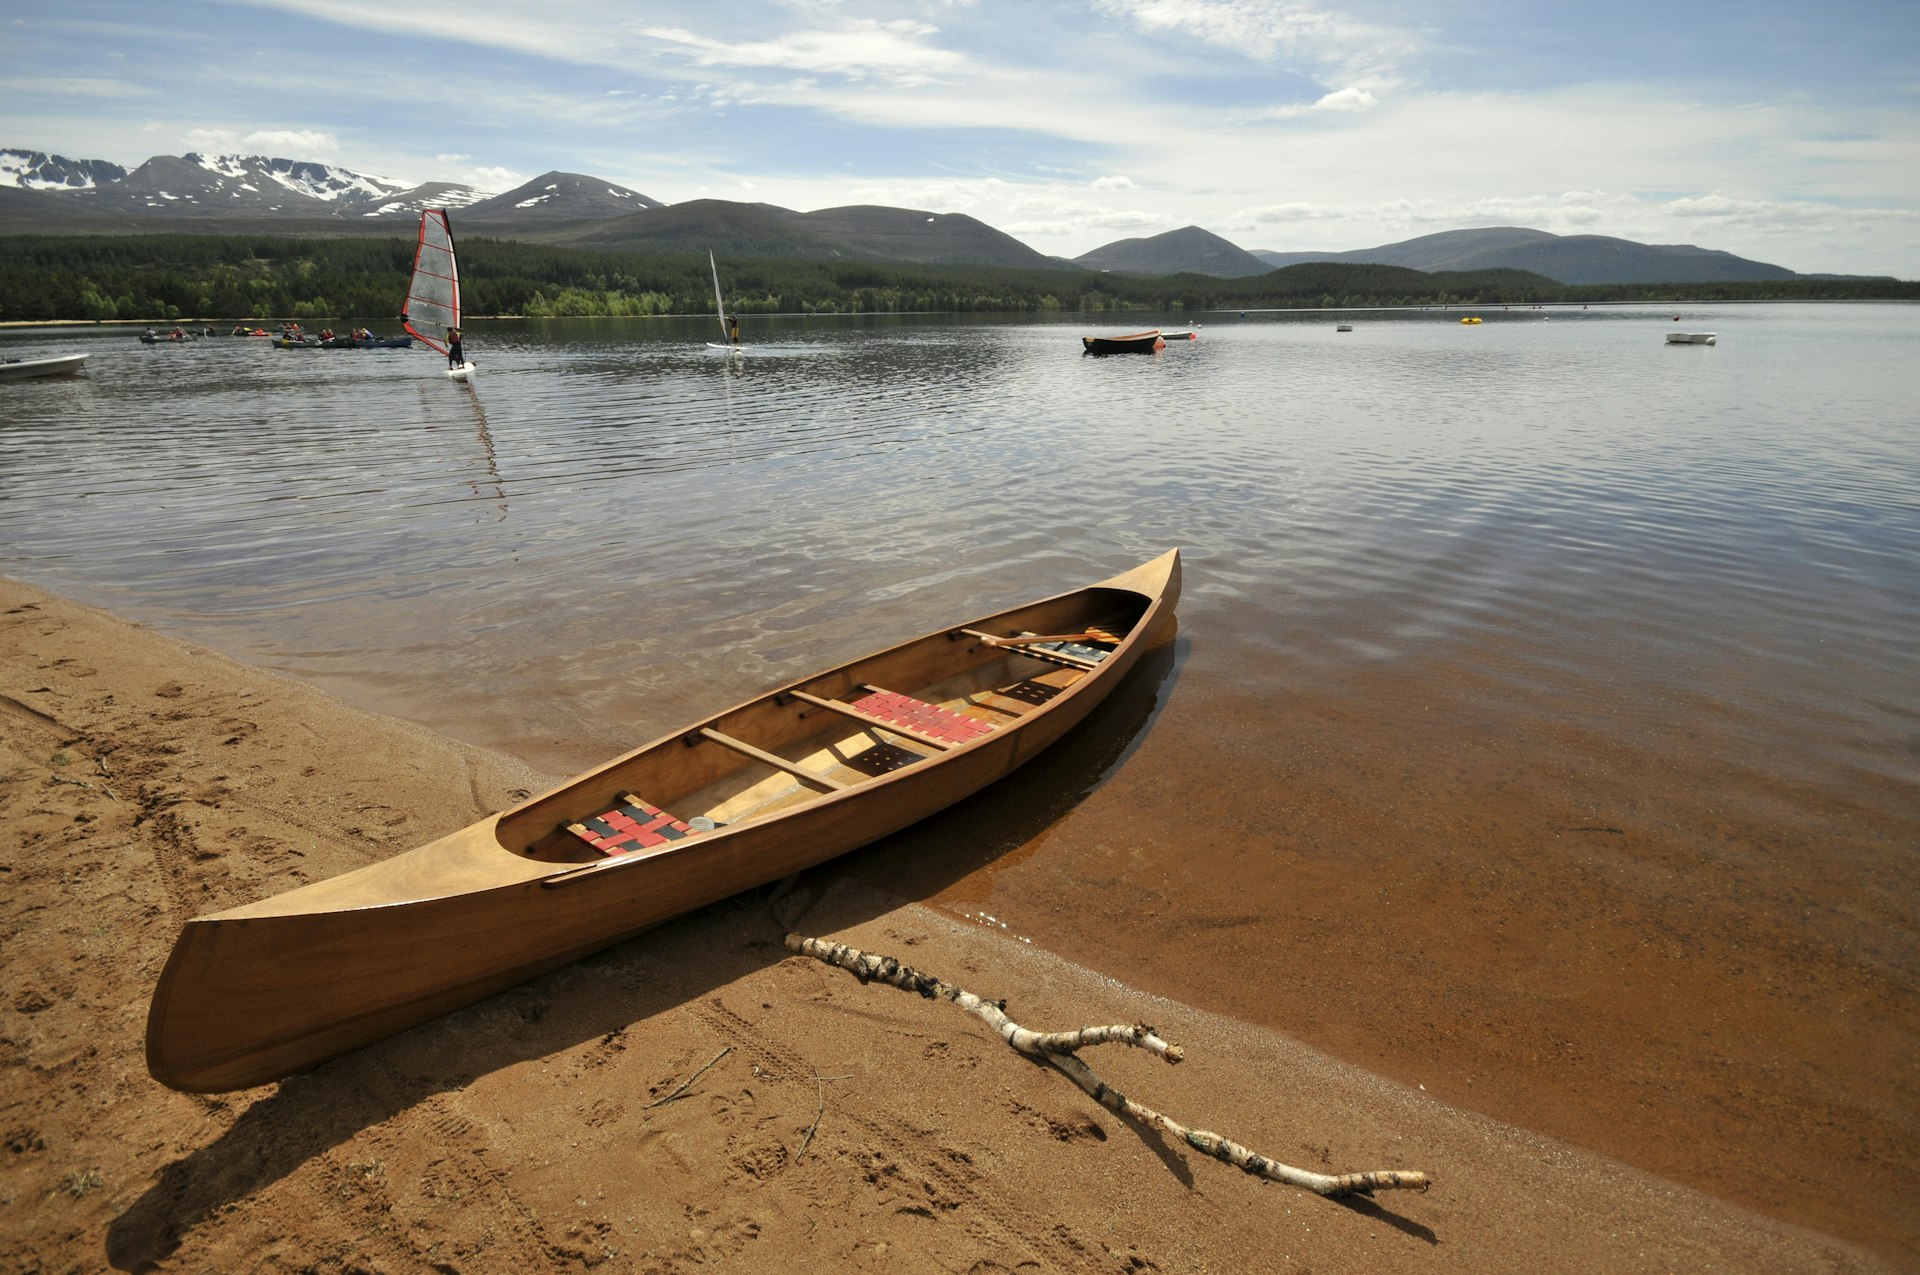 A canoe on the beach and windsurfer on the water of Loch Morlich, National Park of Cairgorns, Scotland, United Kingdom